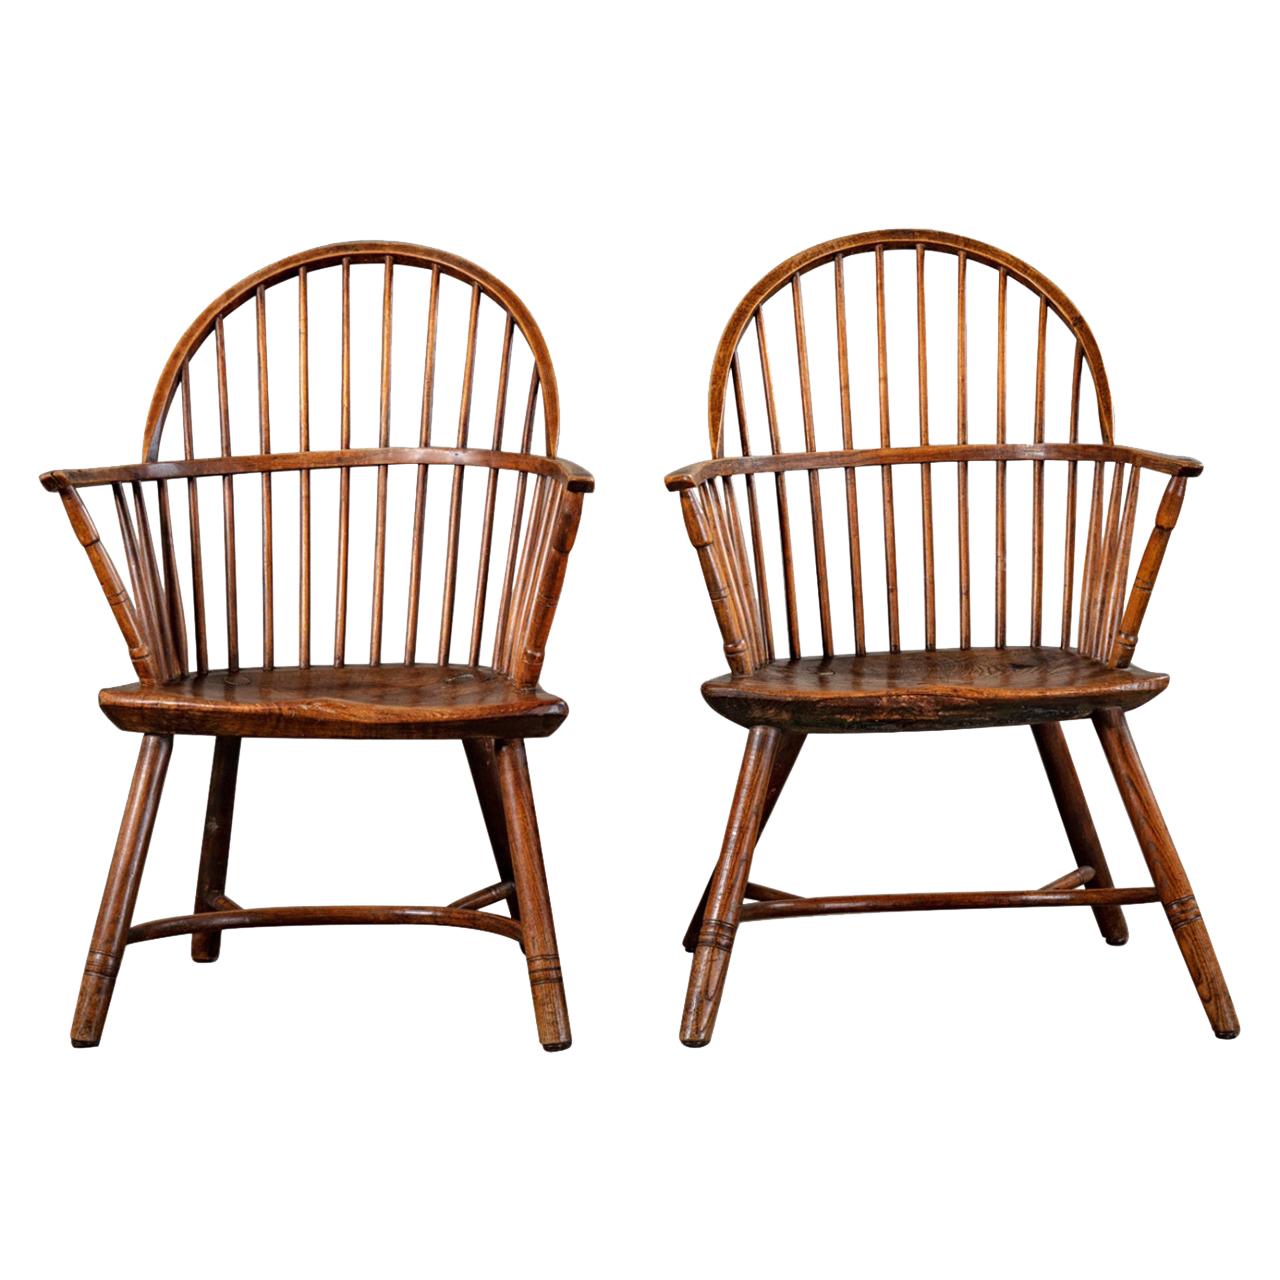 Pair of English Bow Back Windsor Chairs